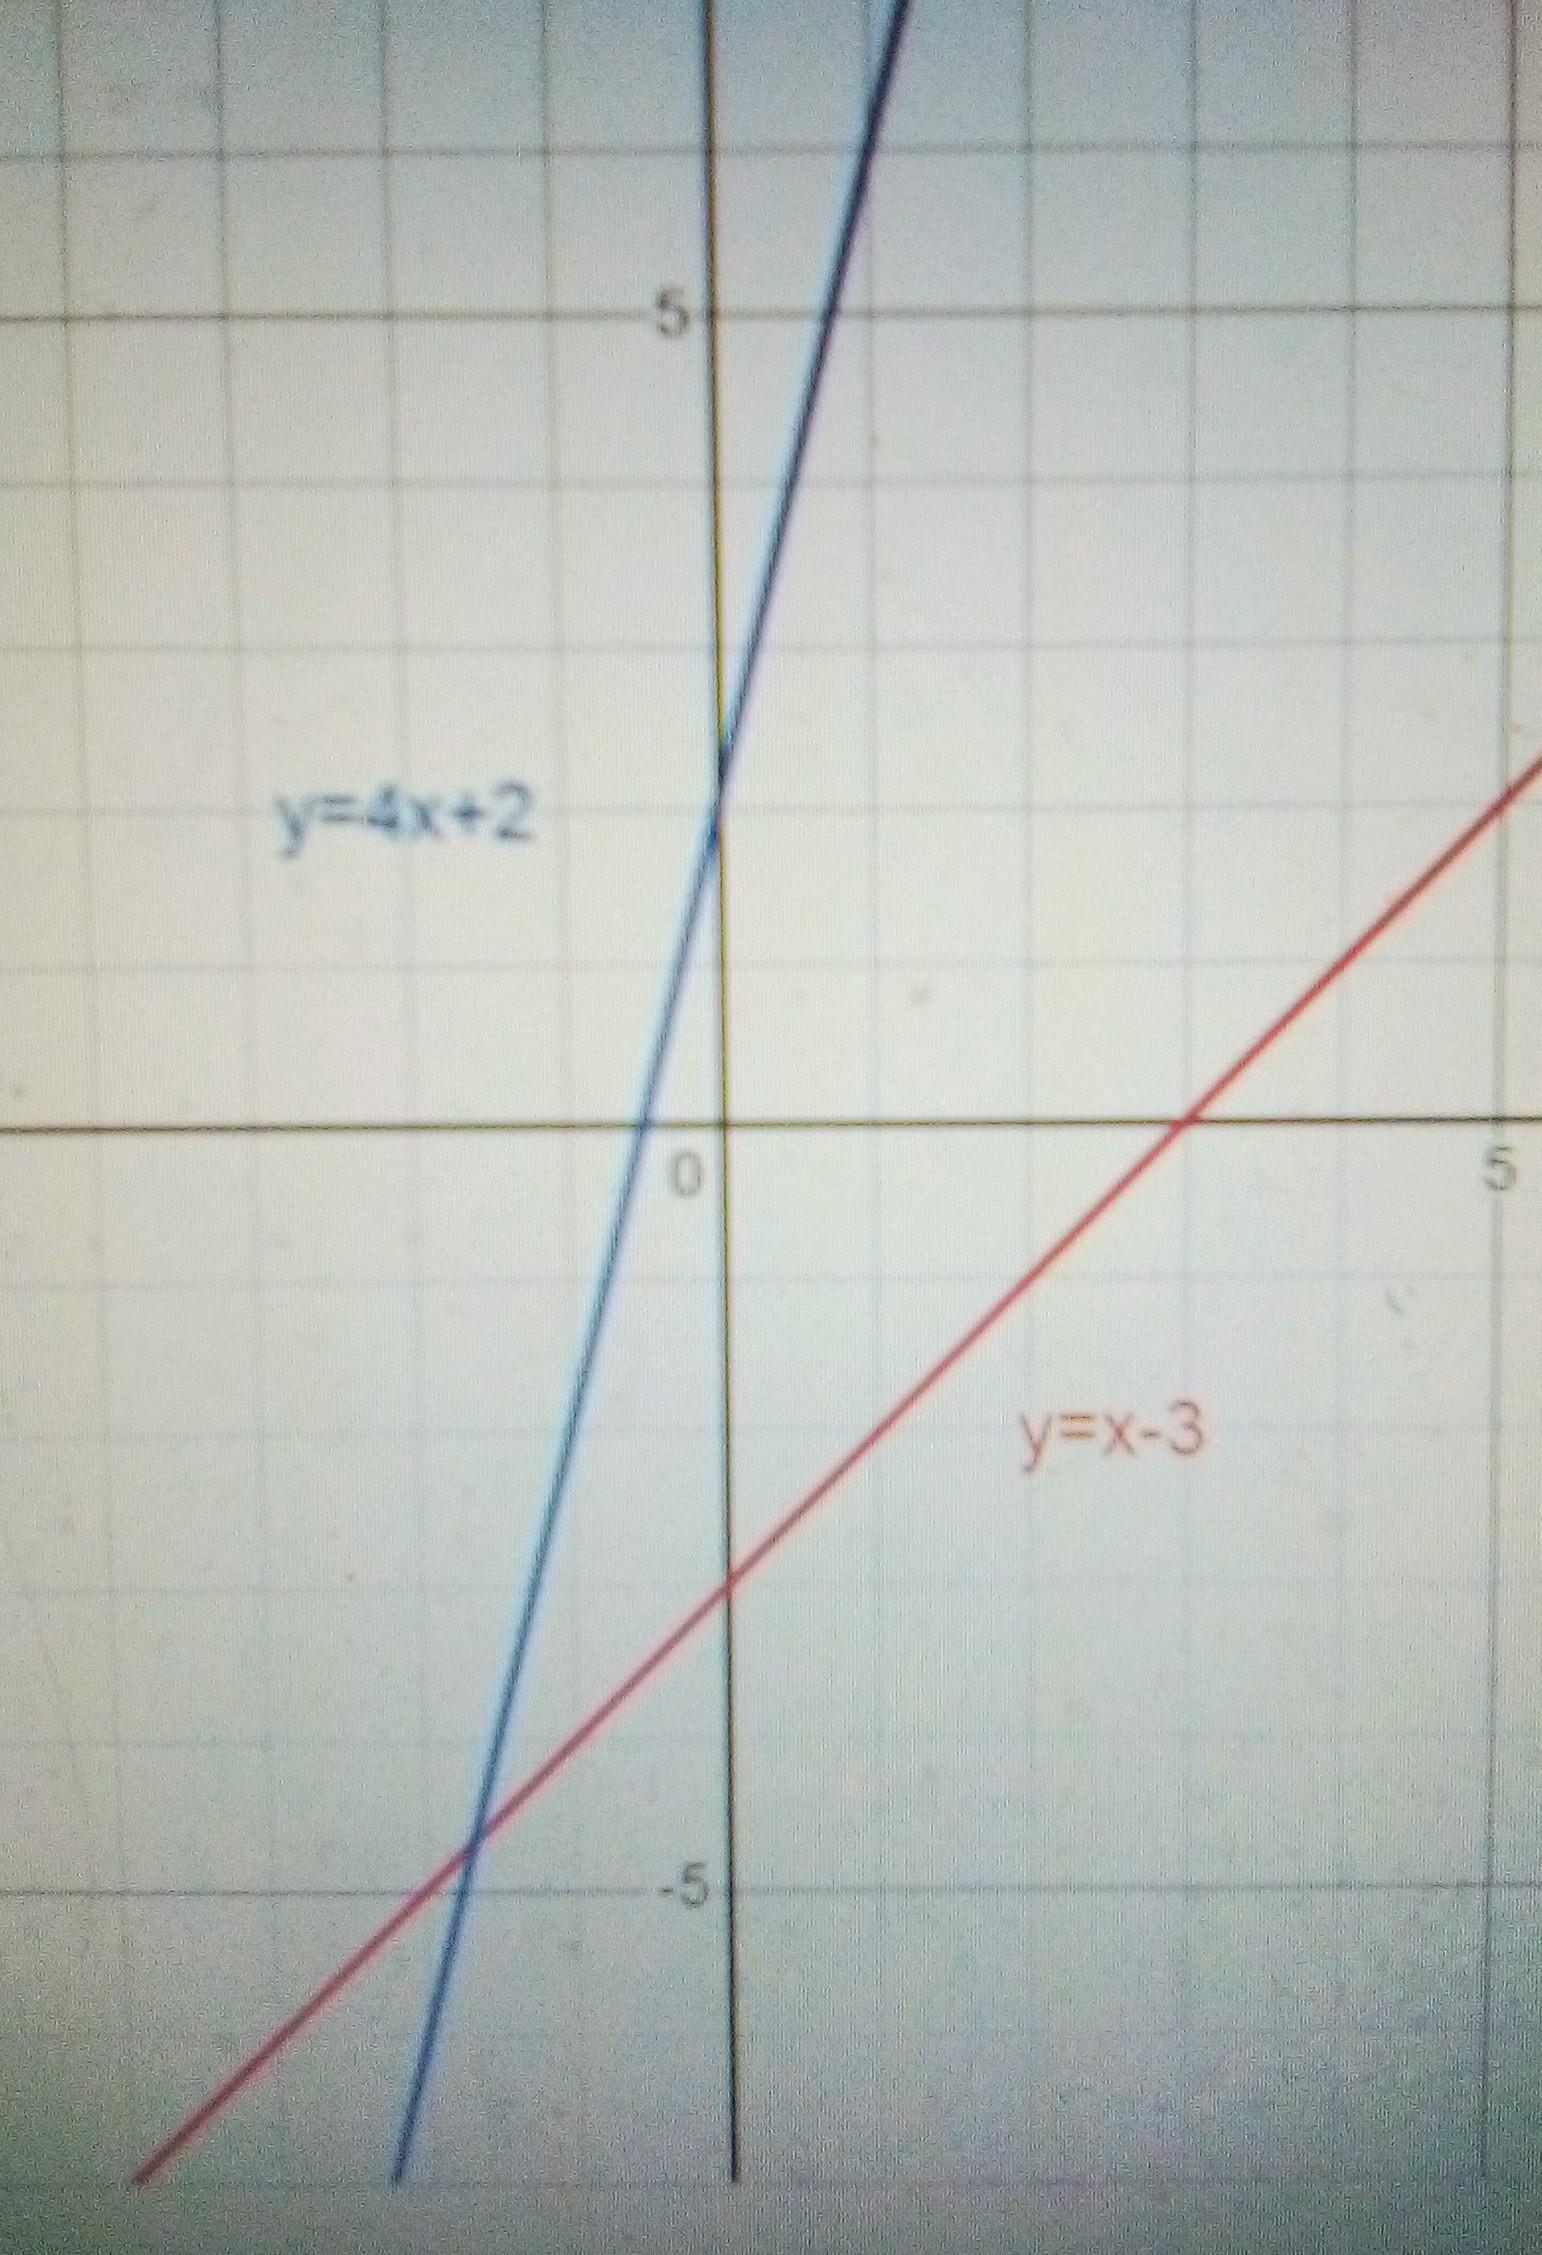 1. What Is The X Intercept Of The Graph Y=x-32. What Is The Y Intercept Of The Graph Y=x-33. What Is